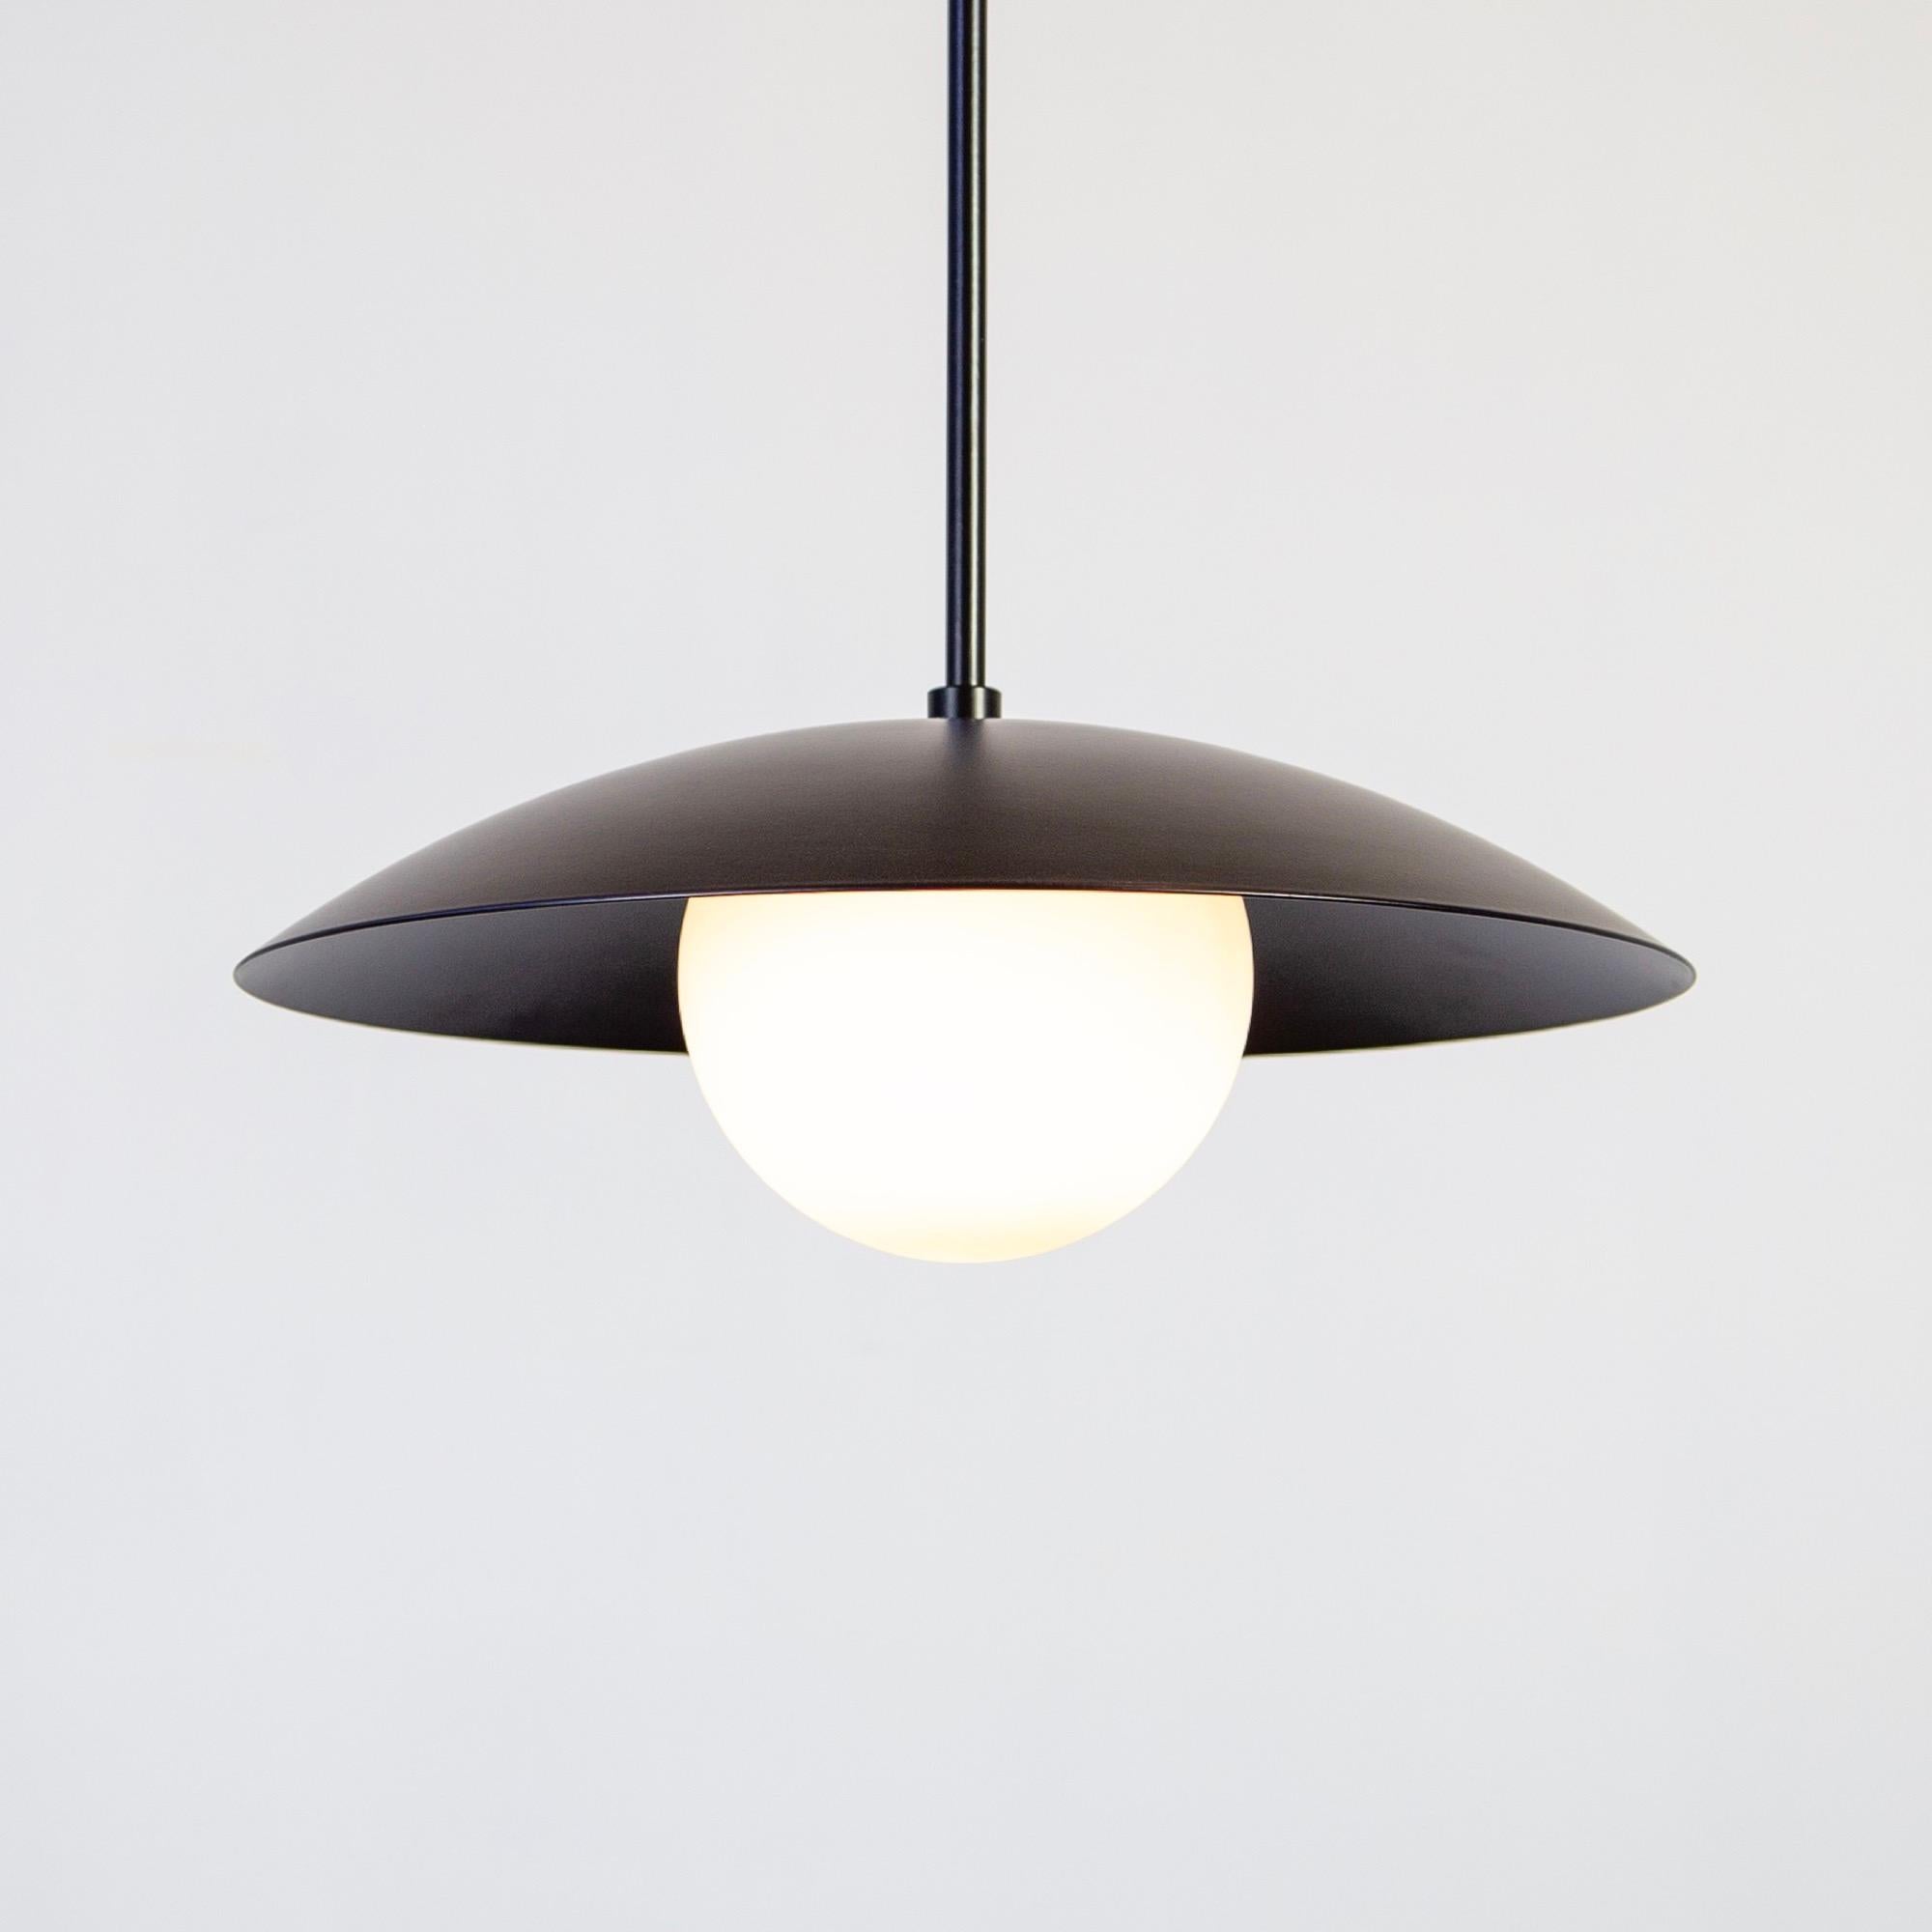 This listing is for 1x Dish Pendant in Black designed and manufactured by RESEARCH Lighting.

Materials: steel & glass
Finish: powder coated steel in black
Electronics: 1x G8 Socket, 6 Watt LED Bulb (included), 600 Lumens
Suspension: 5